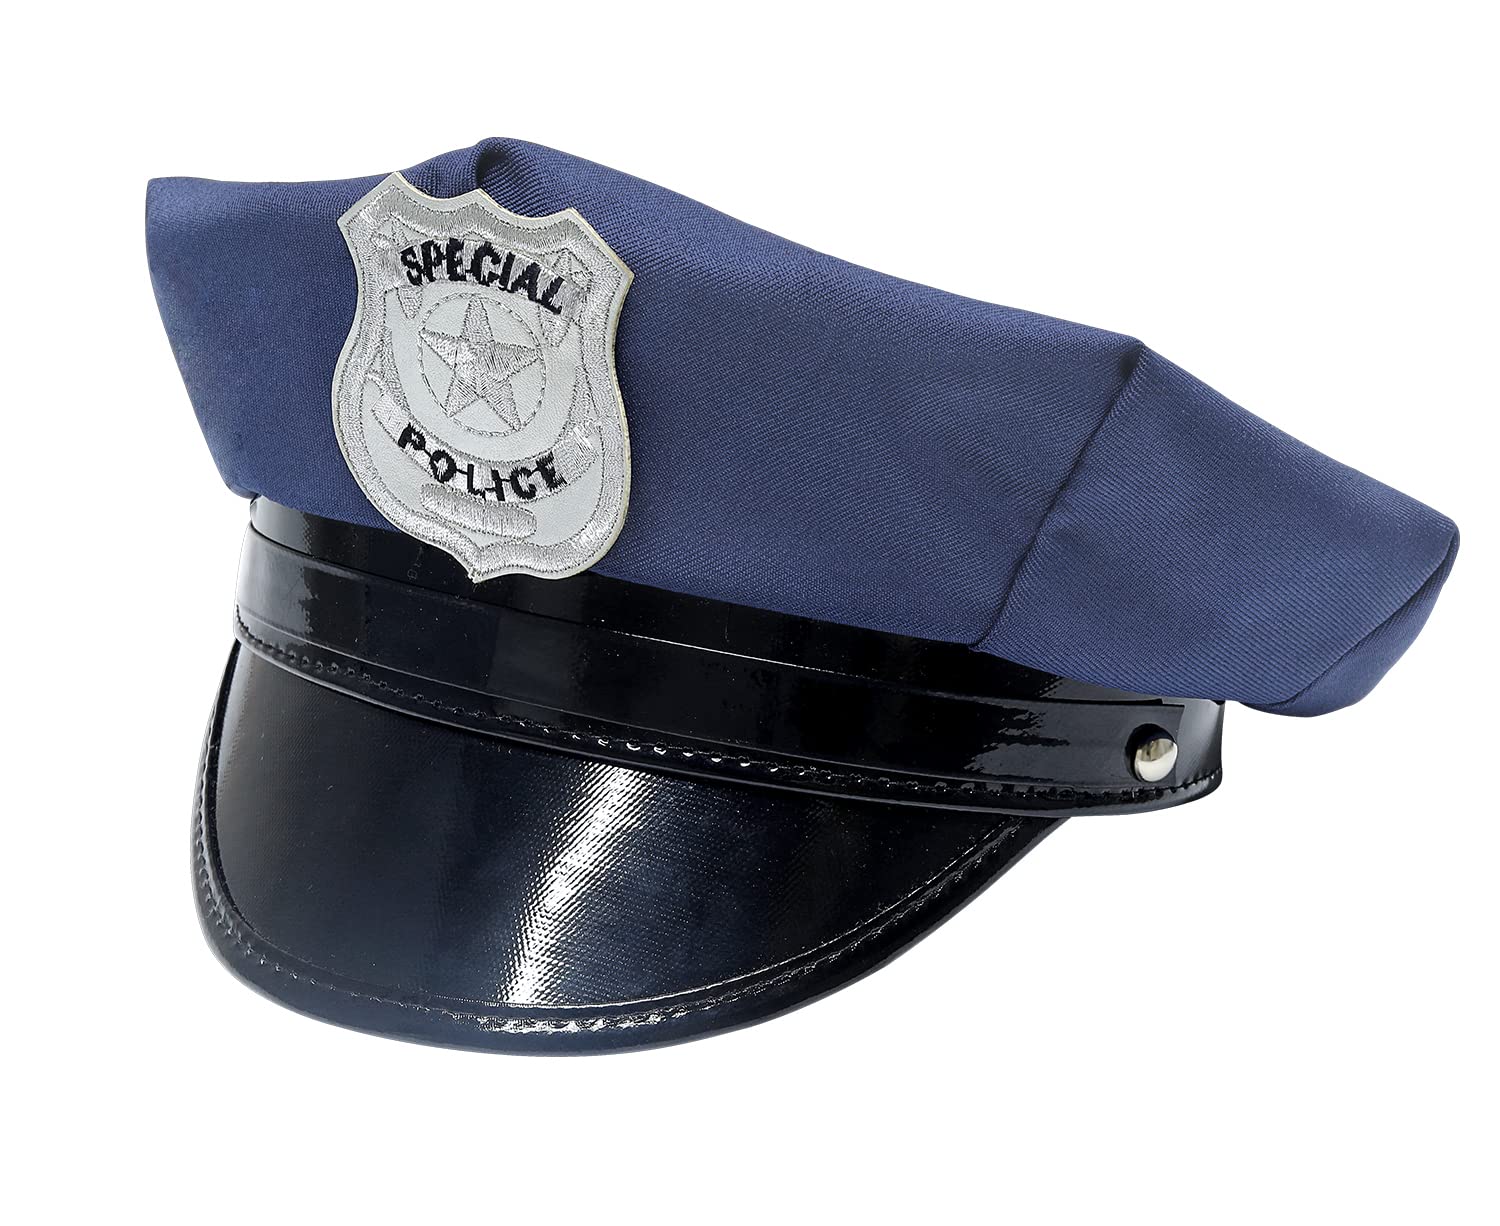 Viyorshop Girls Police Officer Costume Kids Cop Outfit for Halloween Party Dress Up